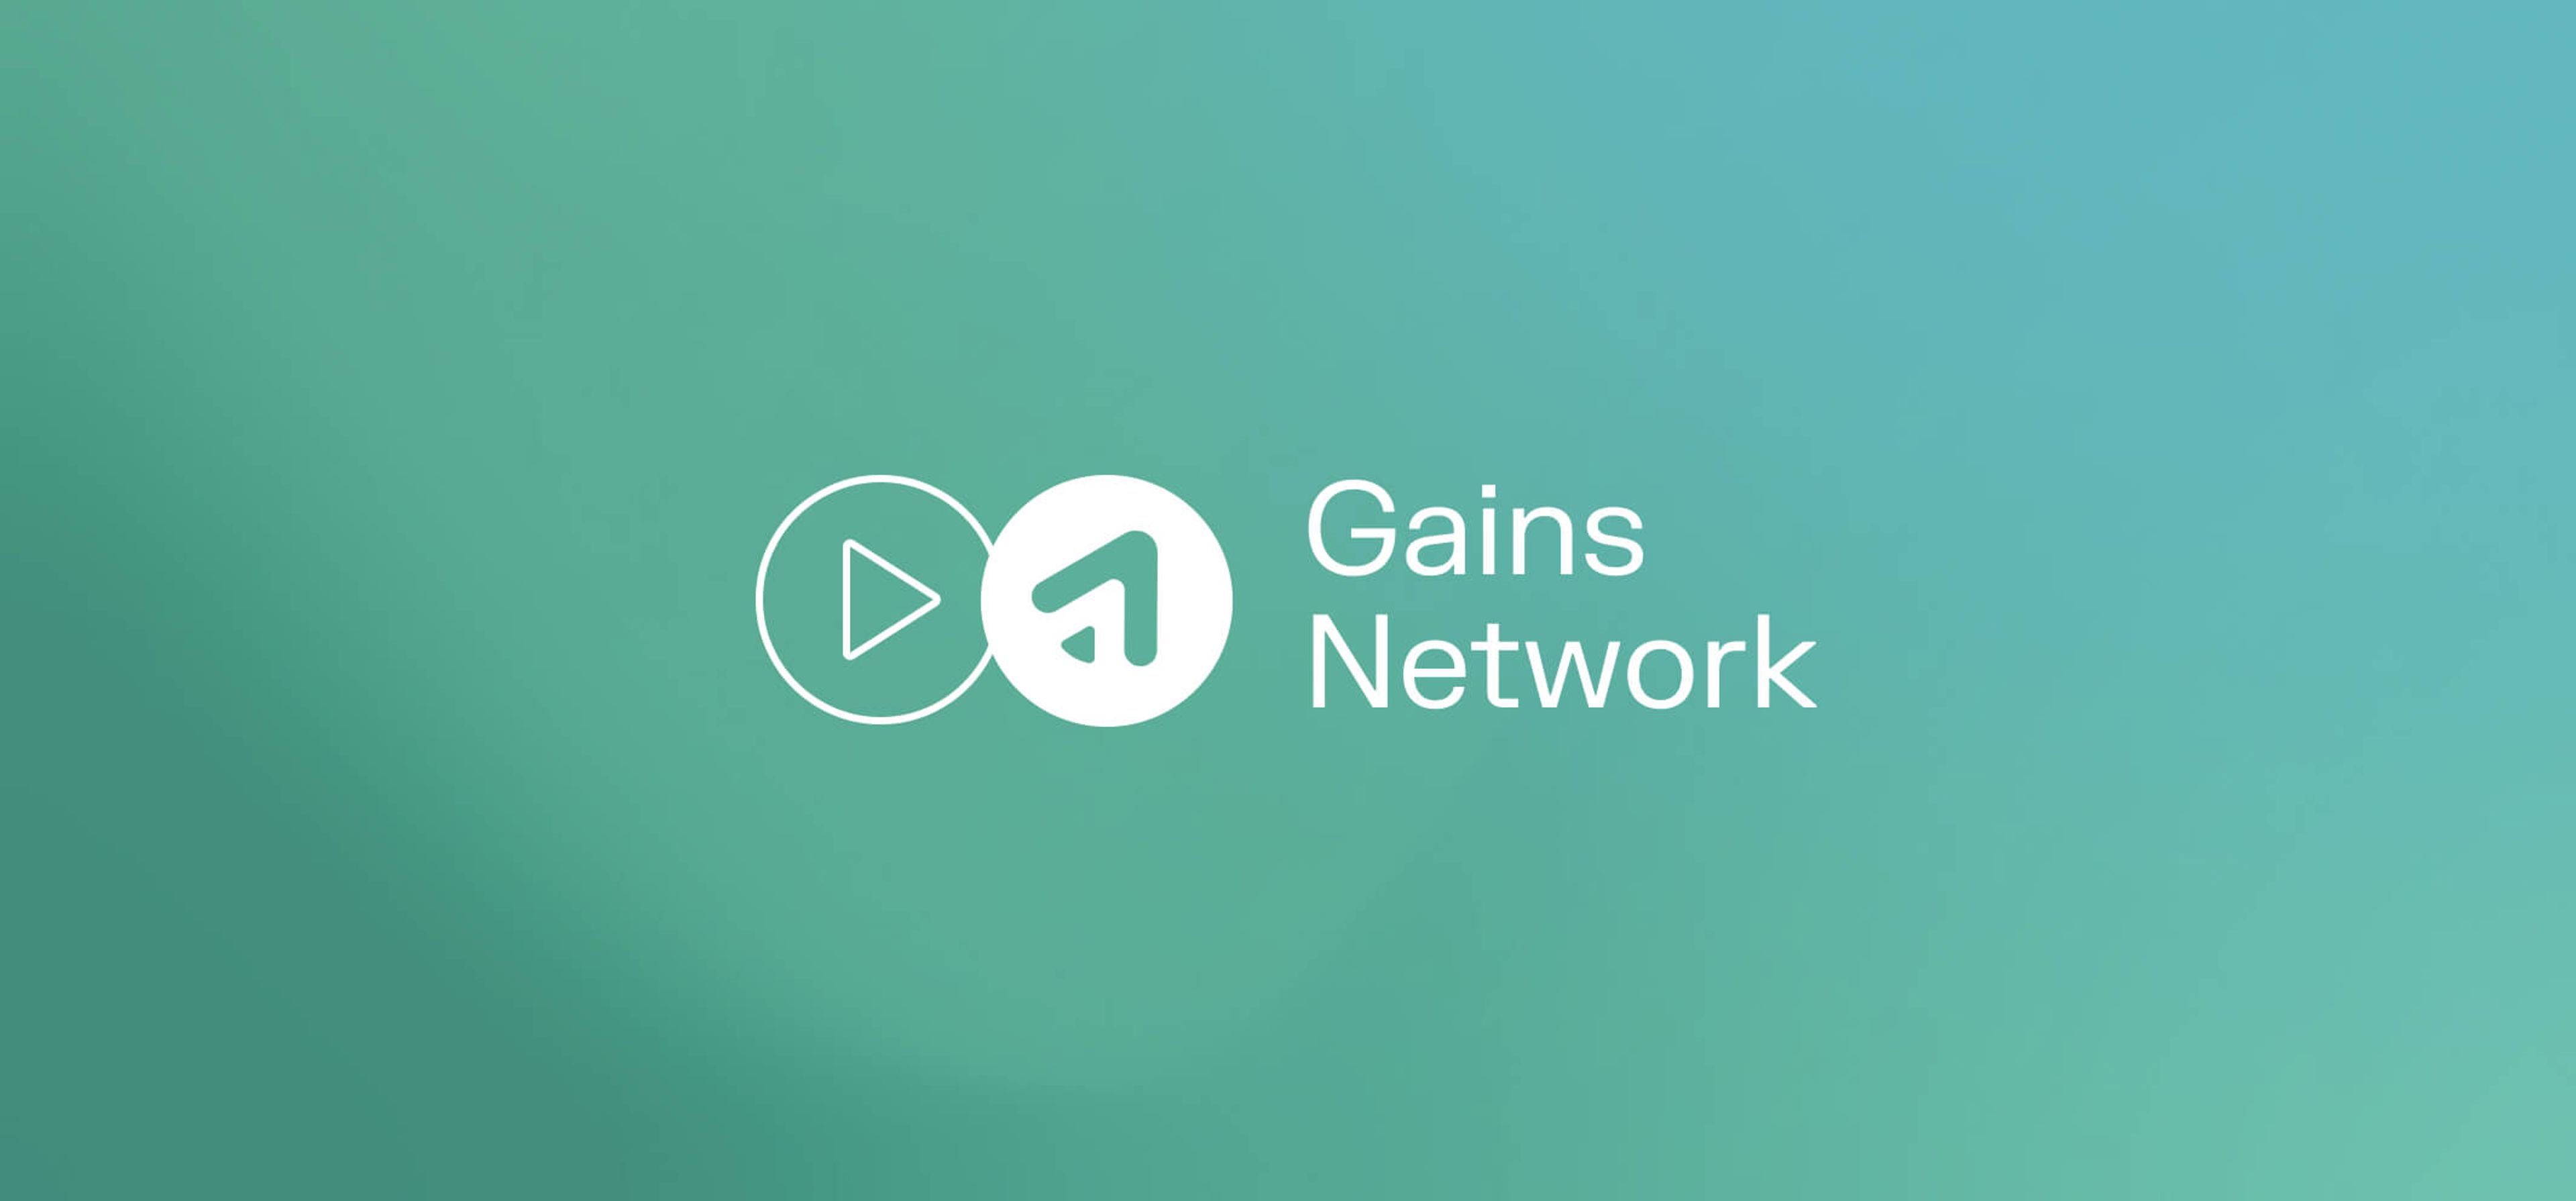 15-minute fundamentals with Gains Network